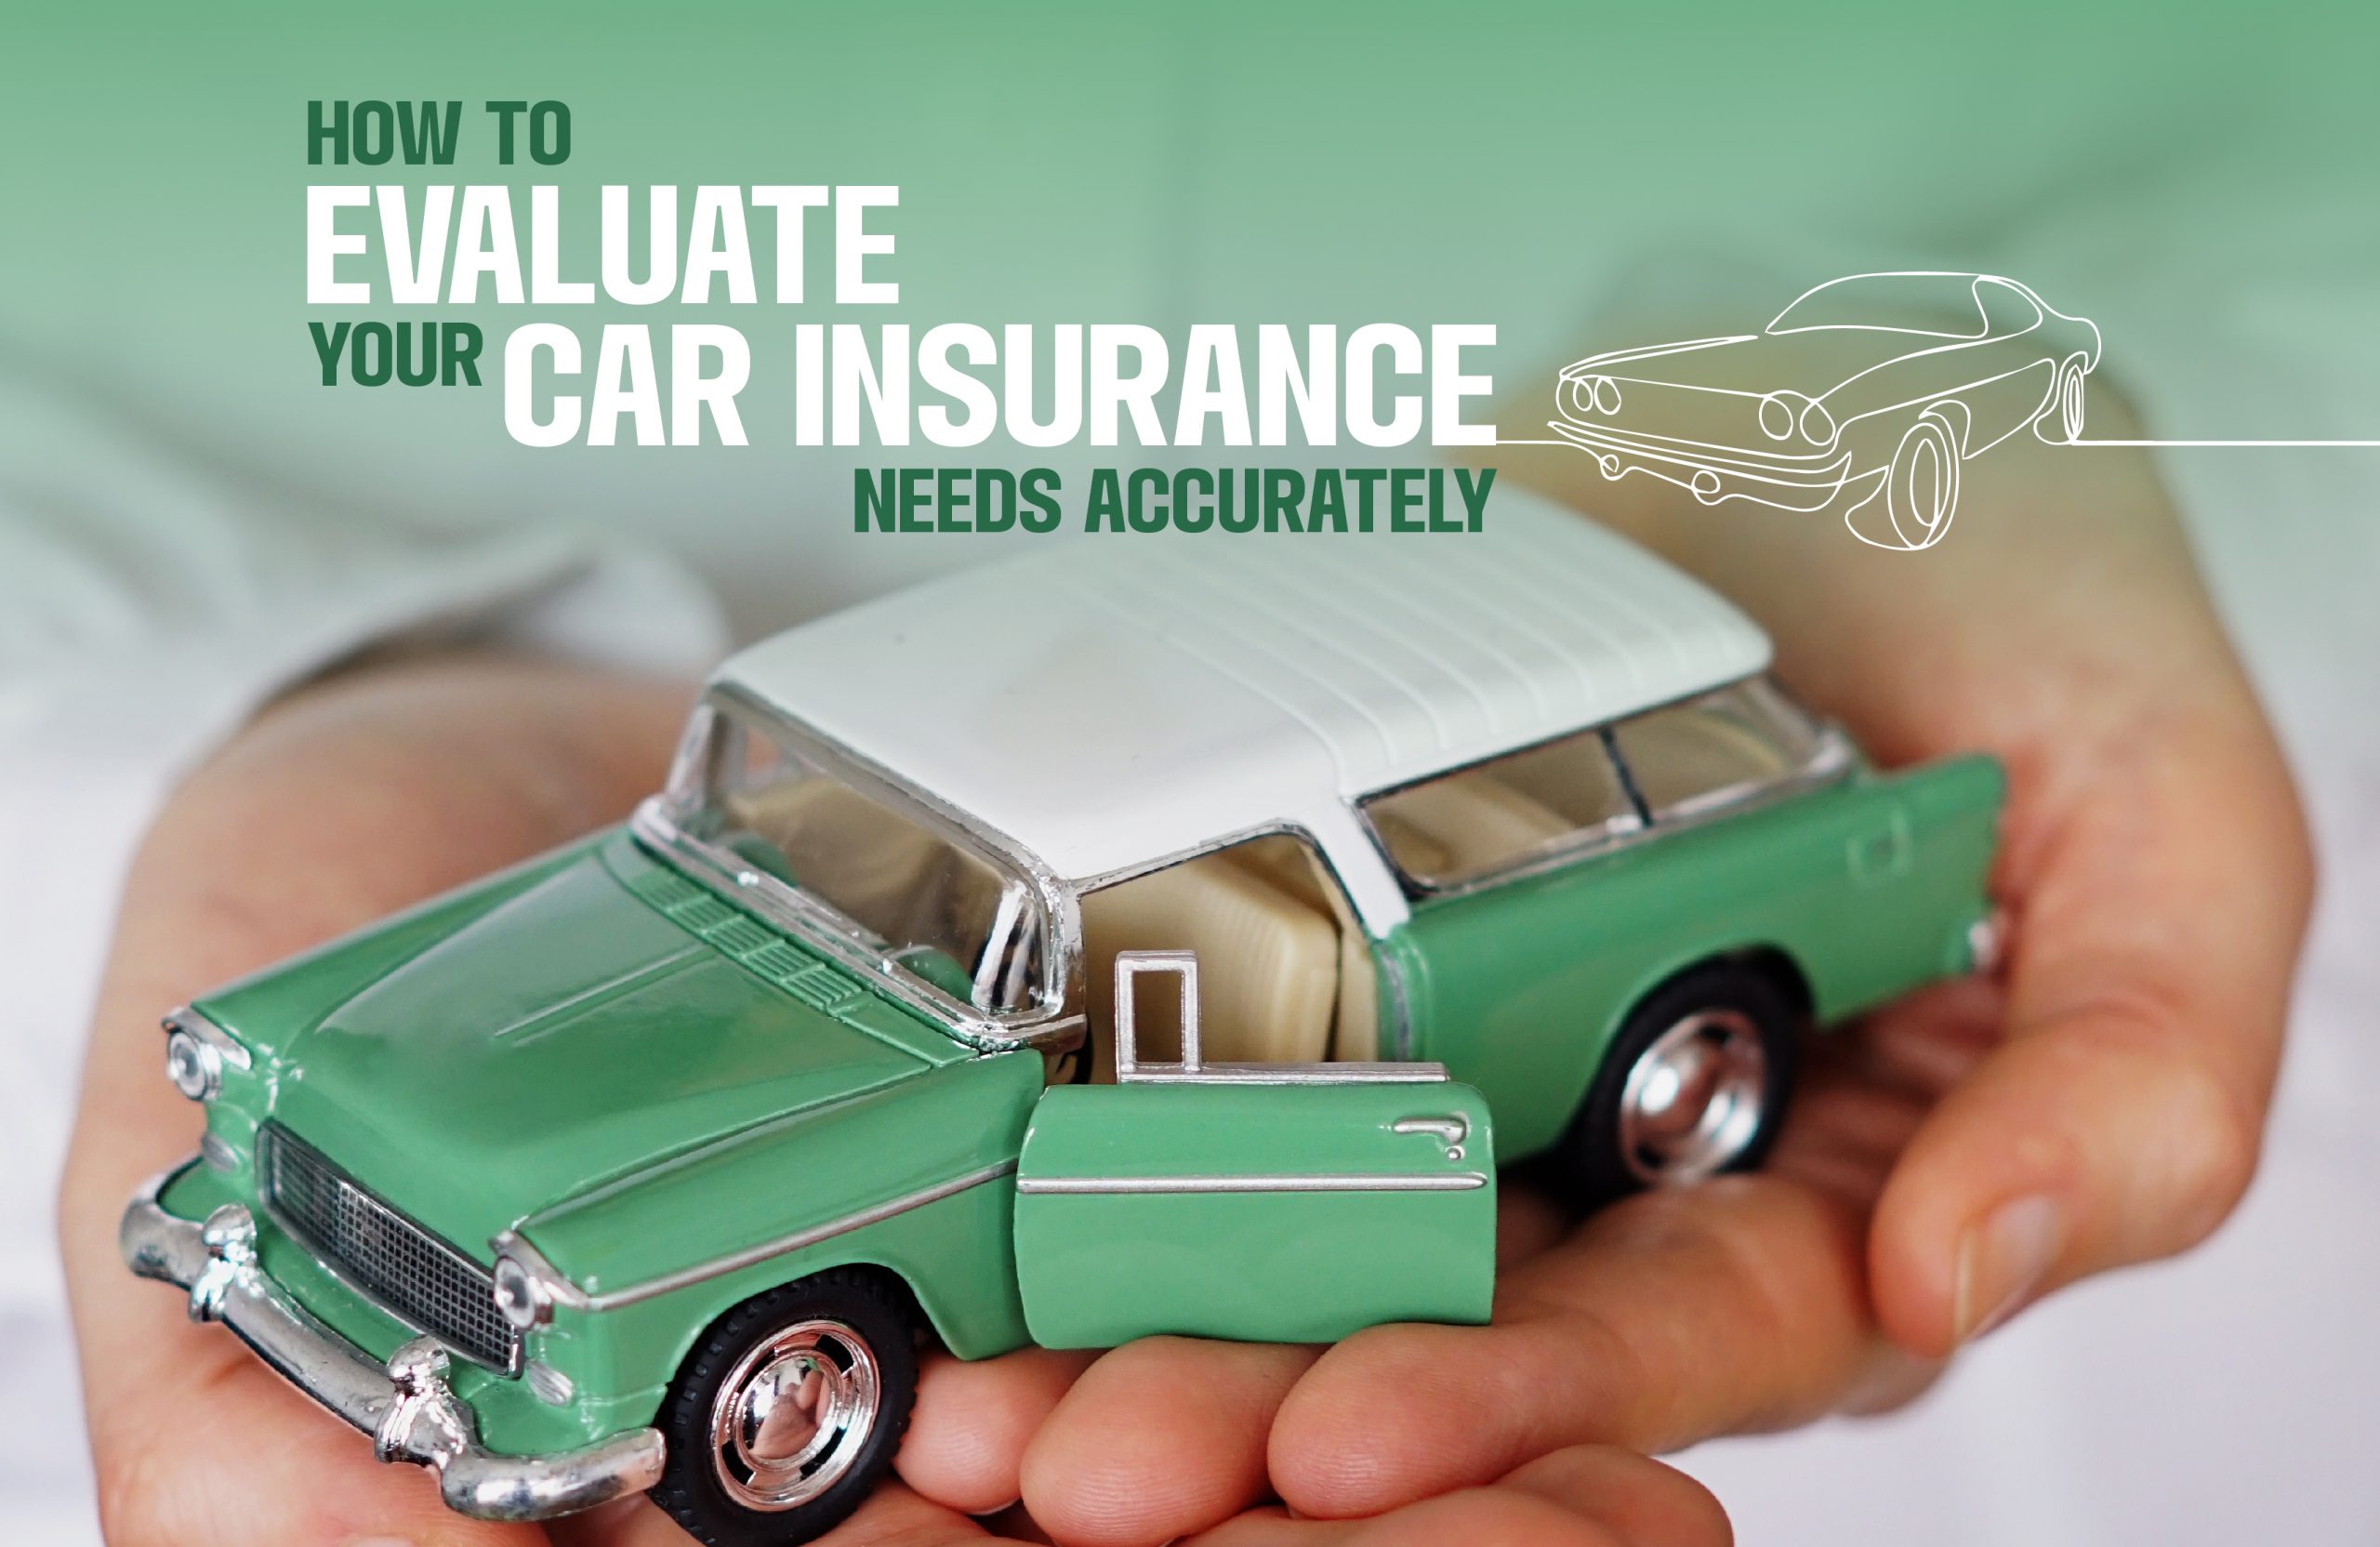 How to Evaluate Your Car Insurance Needs Accurately